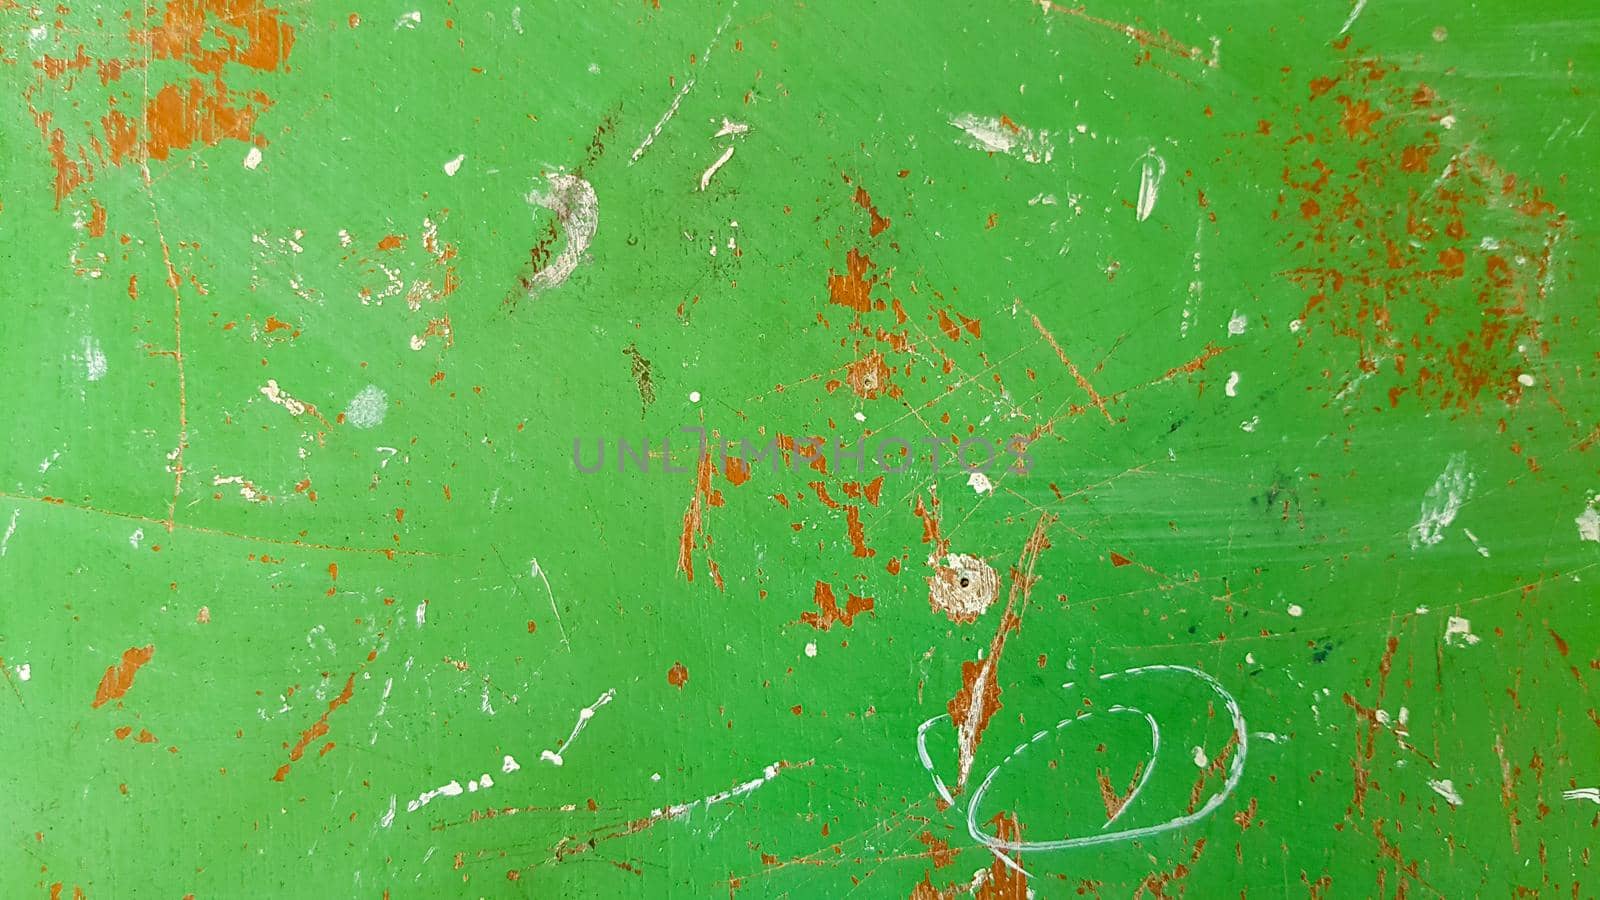 Old green grungy wall background or texture